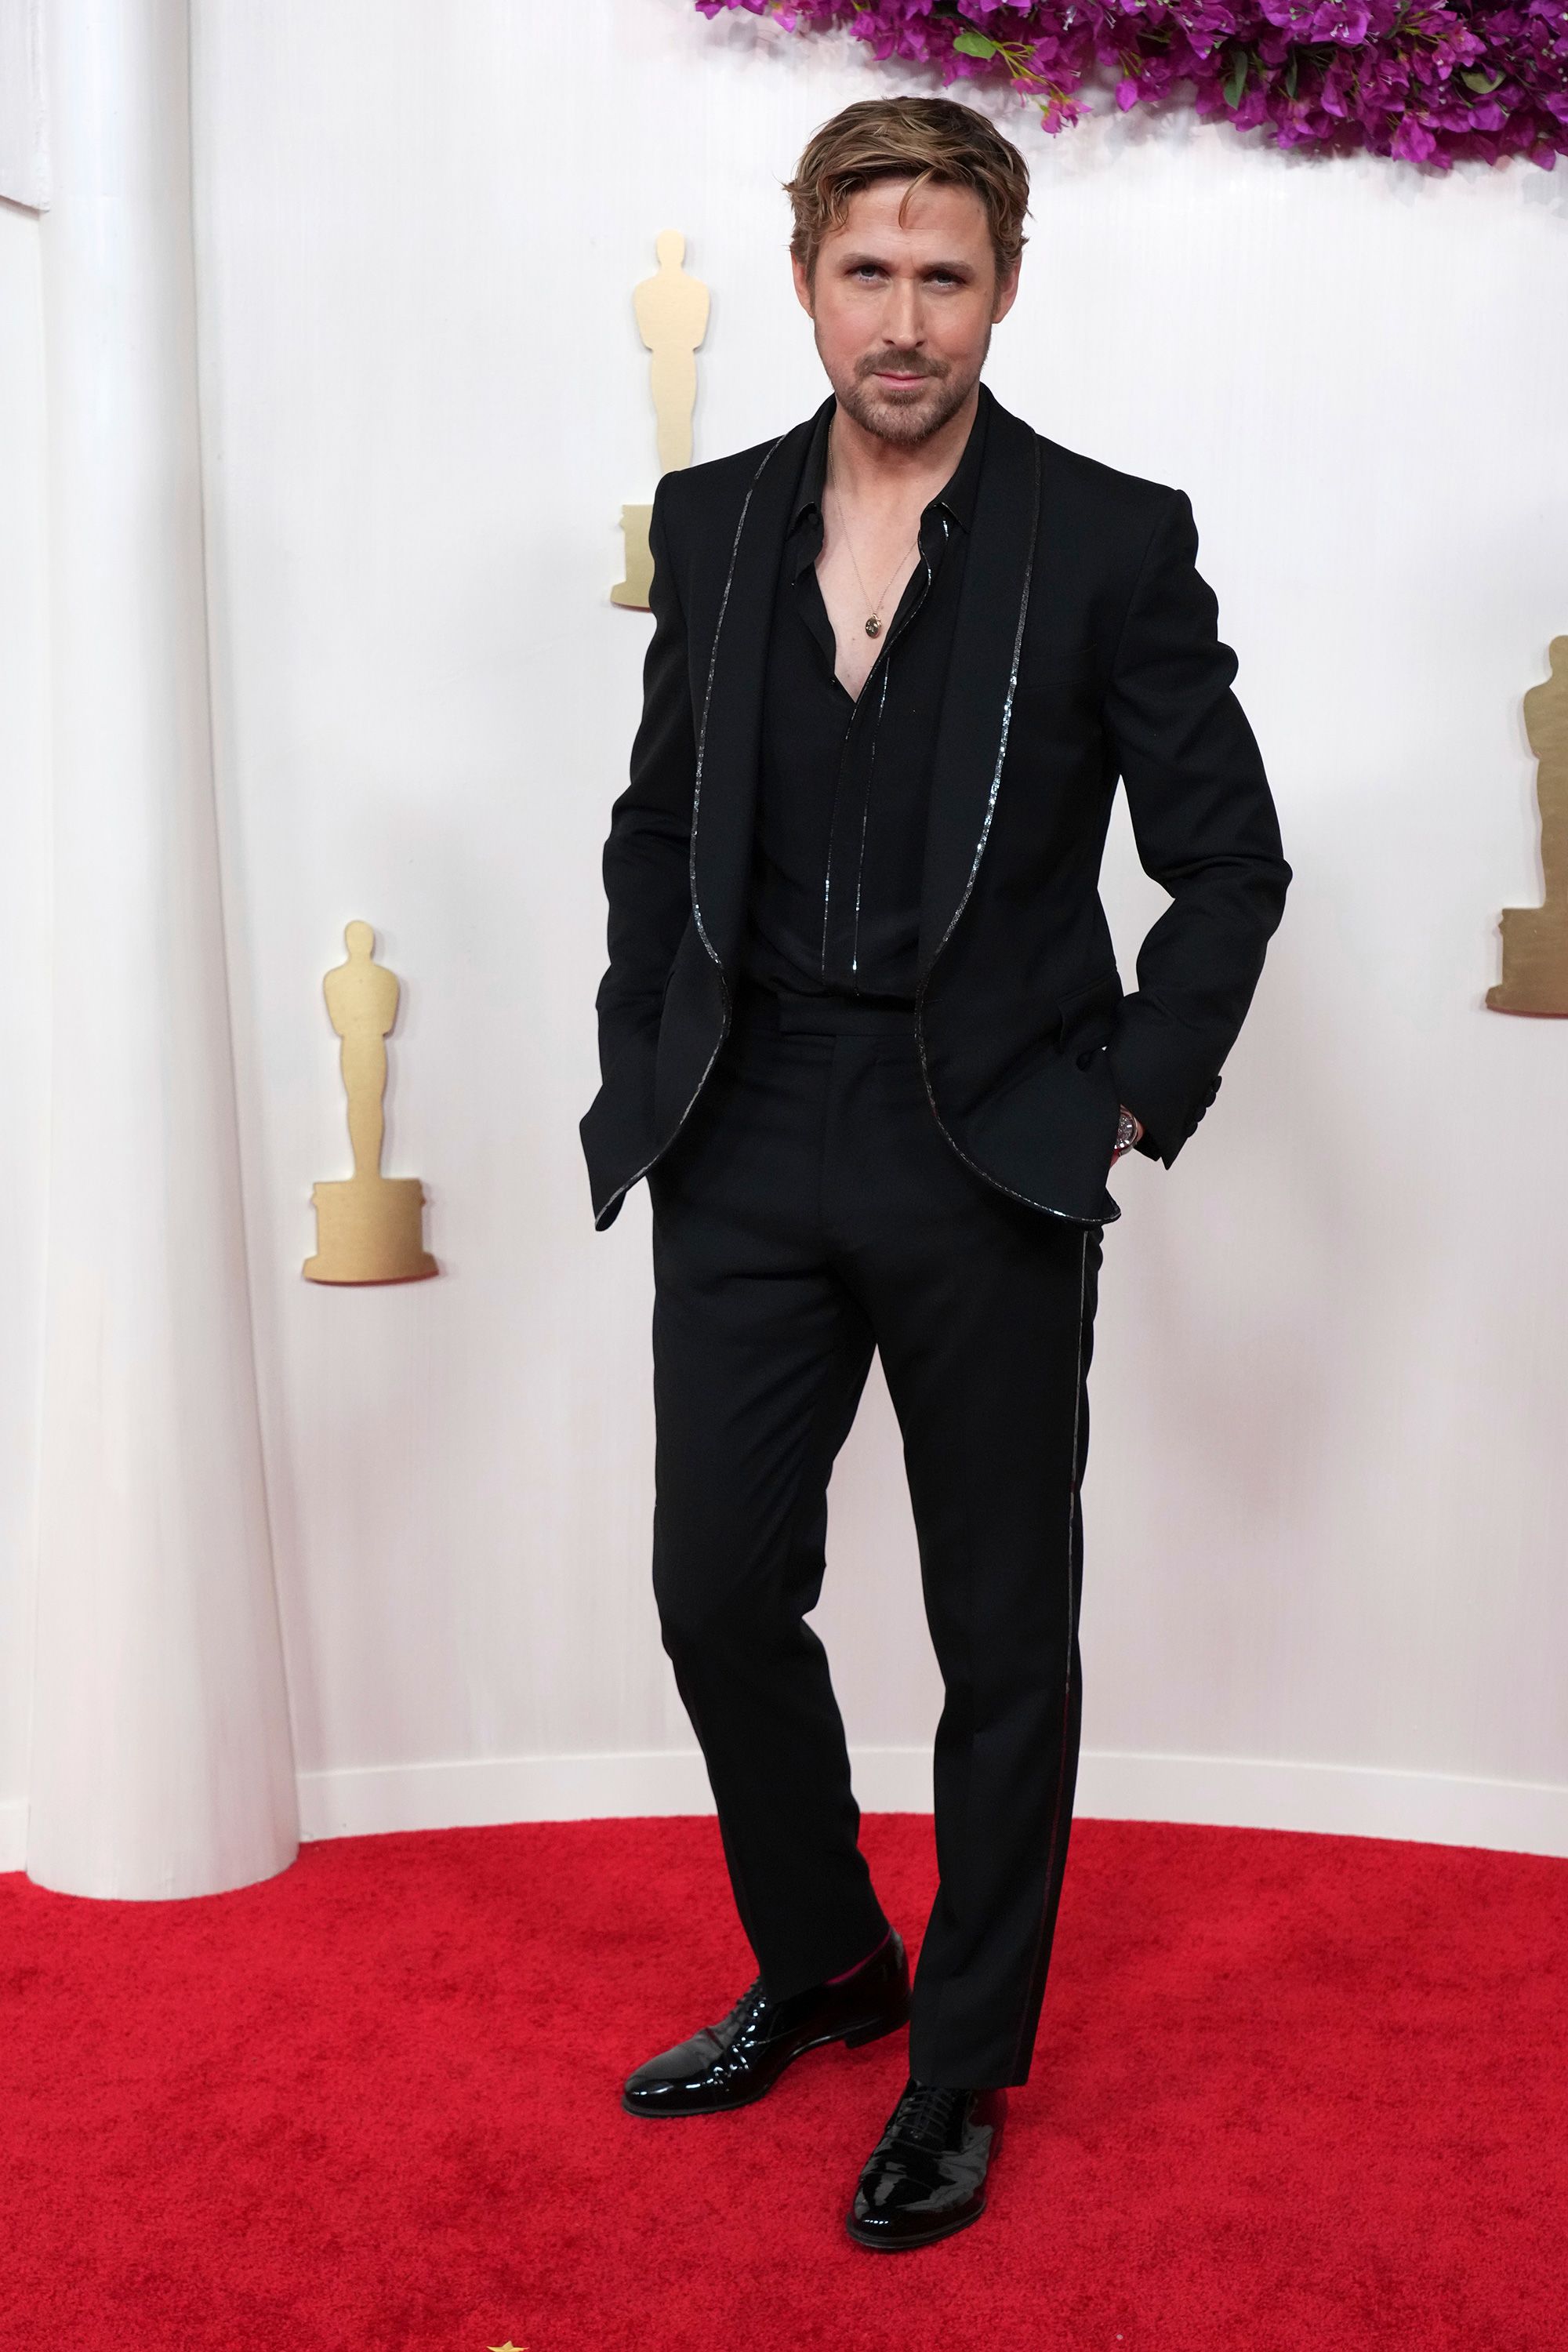 Ryan Gosling, who was nominated for Best Supporting Actor for his performance in Barbie, arrived in a custom Gucci suit lined with silver sequins.